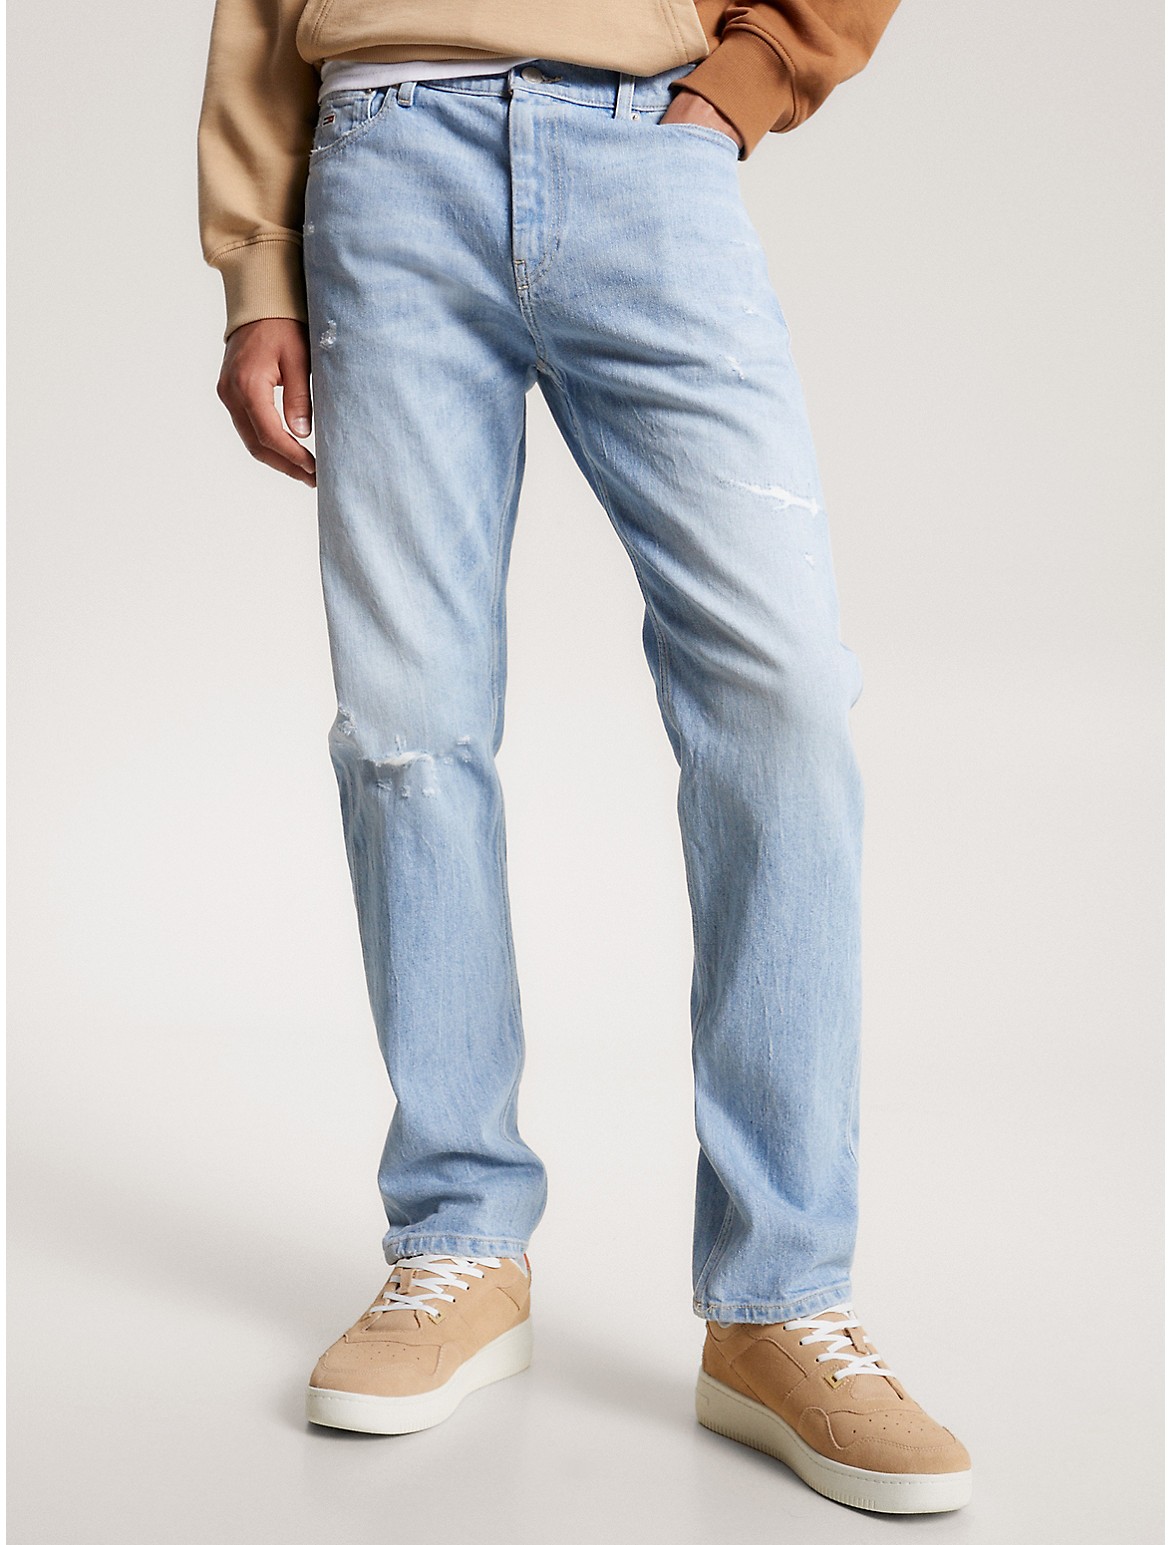 Tommy Hilfiger Relaxed Straight Fit Light Wash Jean In Denim Light